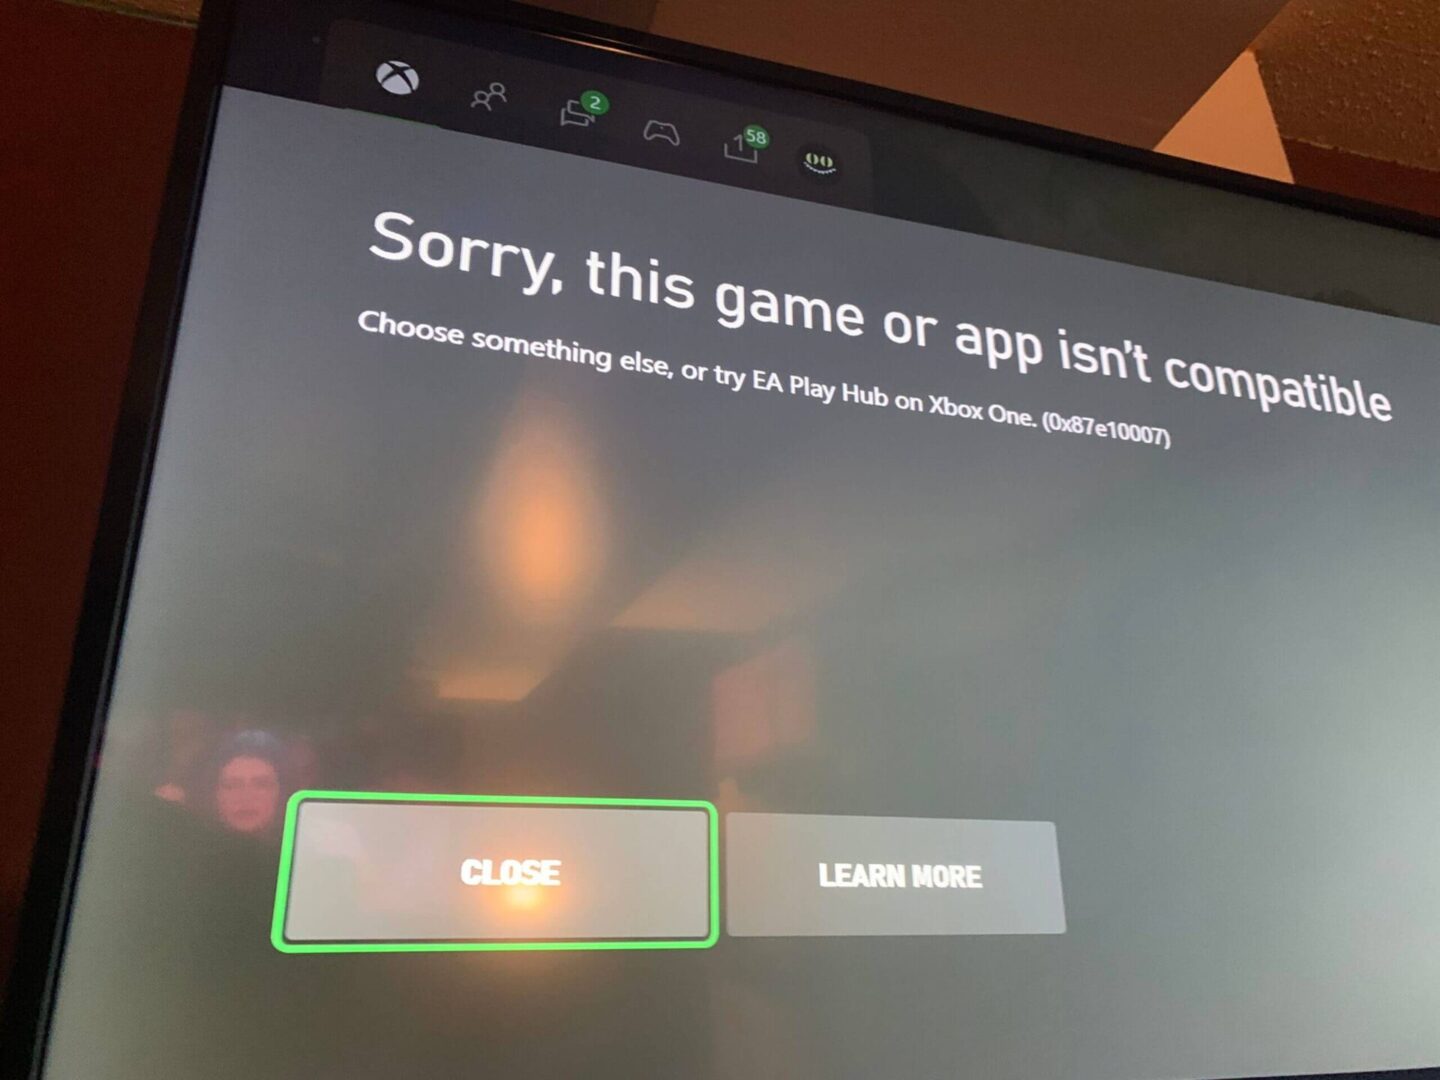 Display message of the Xbox One error code 0x87e10007